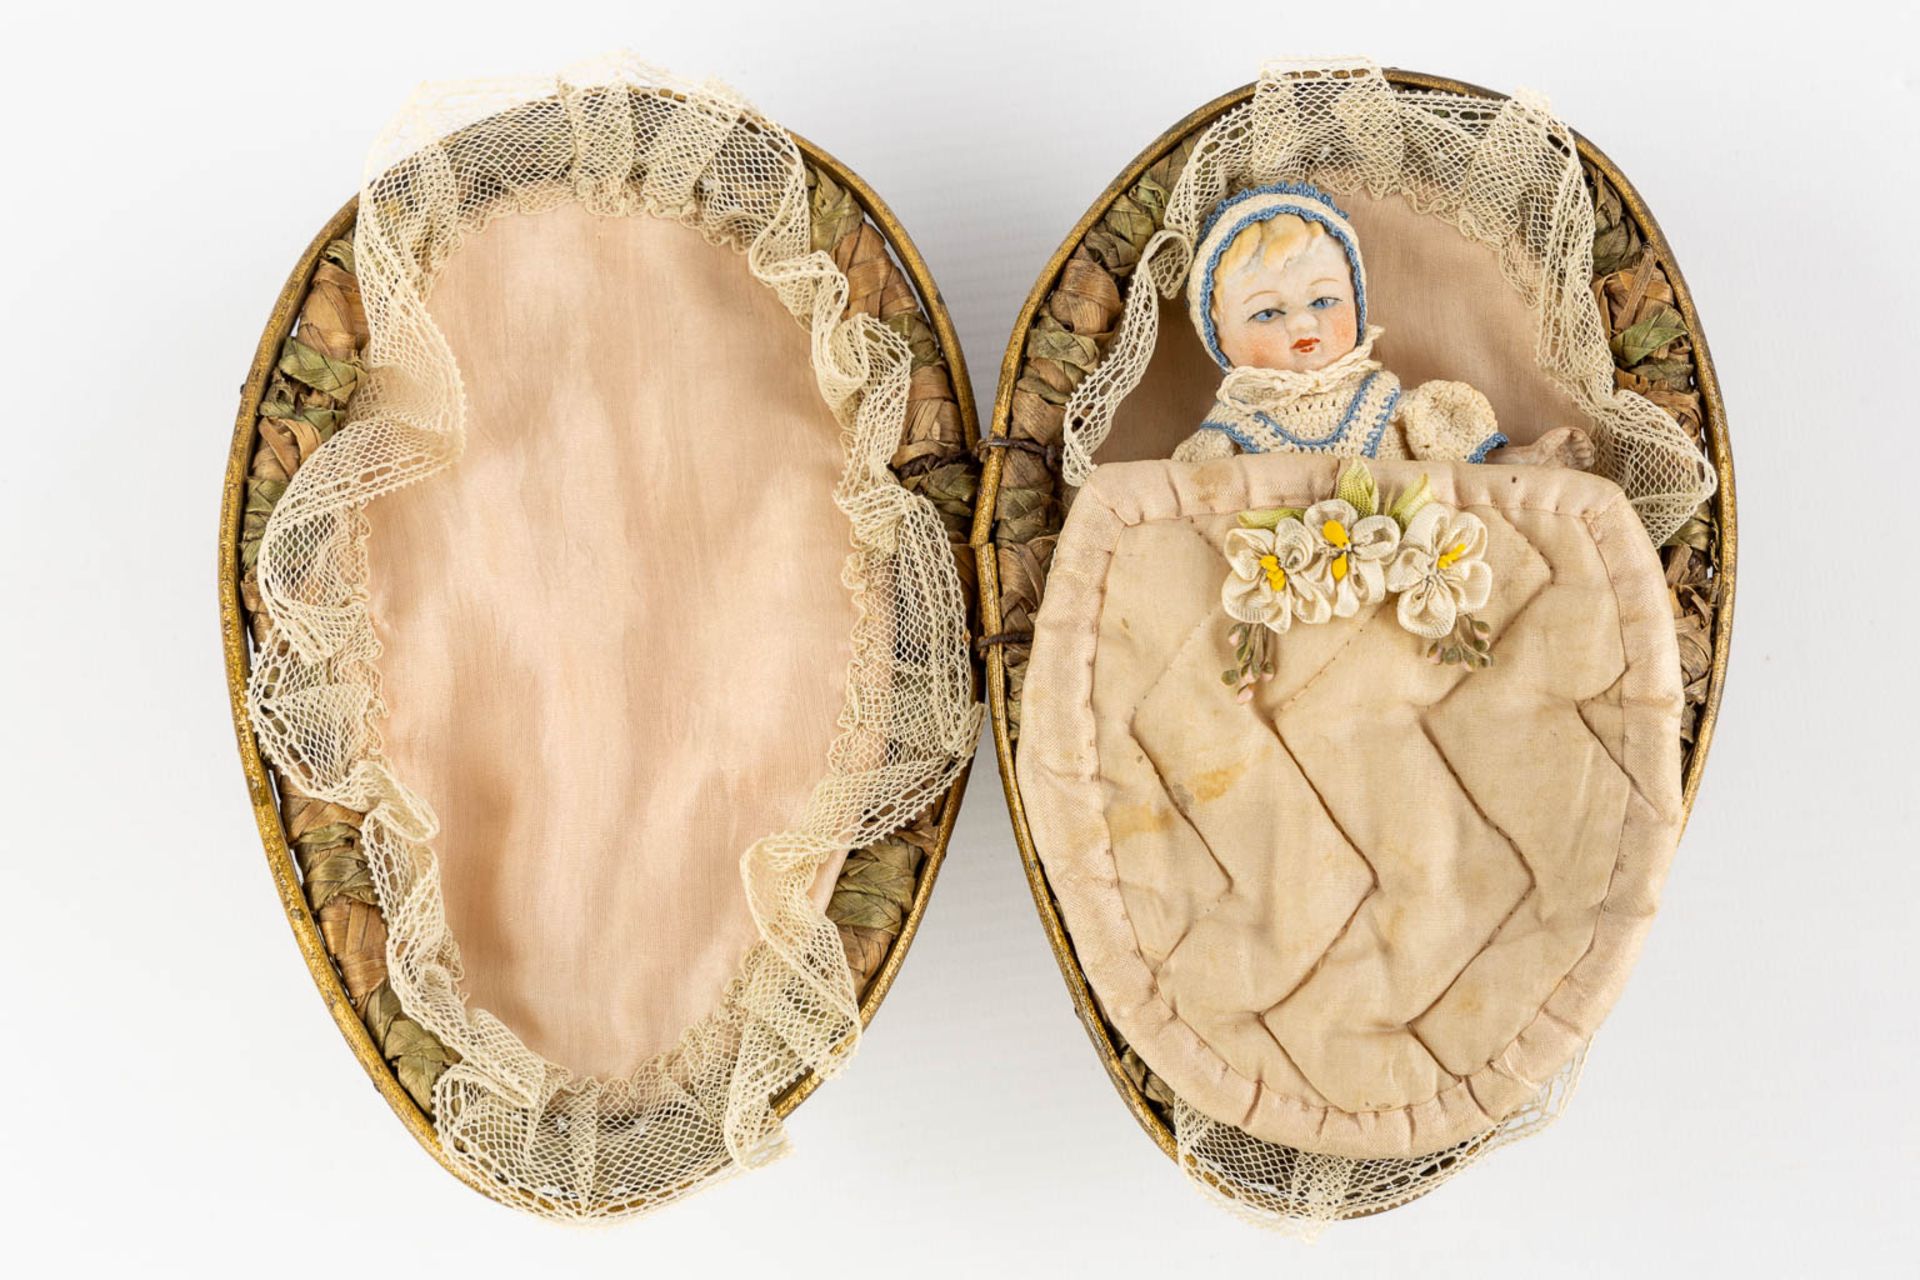 Three antique dolls, stored in a woven basket. (L:11,5 x W:17 x H:7 cm) - Image 11 of 13